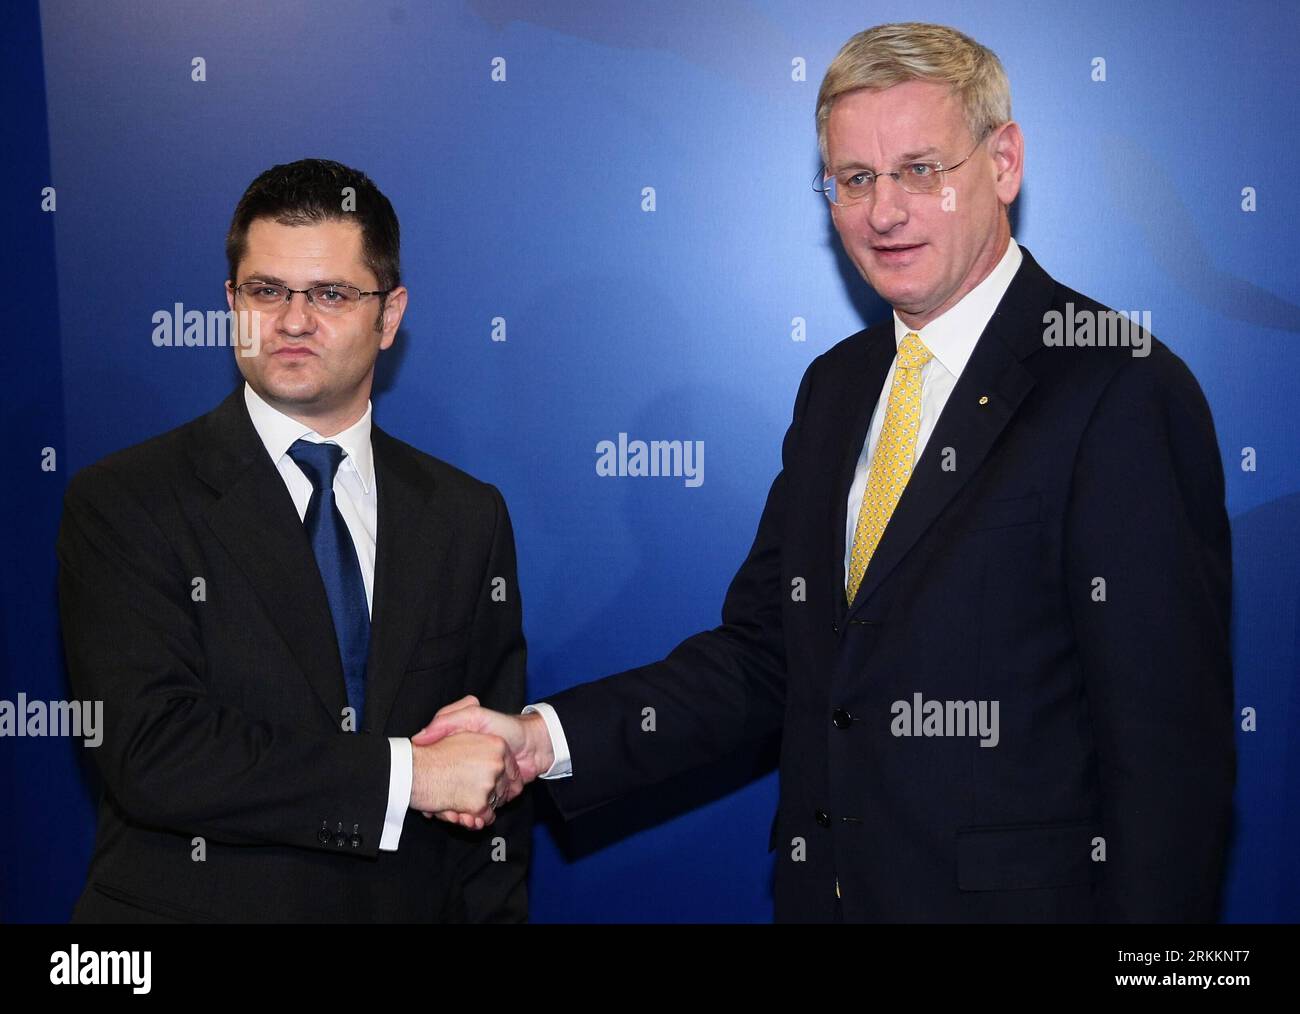 Bildt r hi-res stock photography images Alamy - and